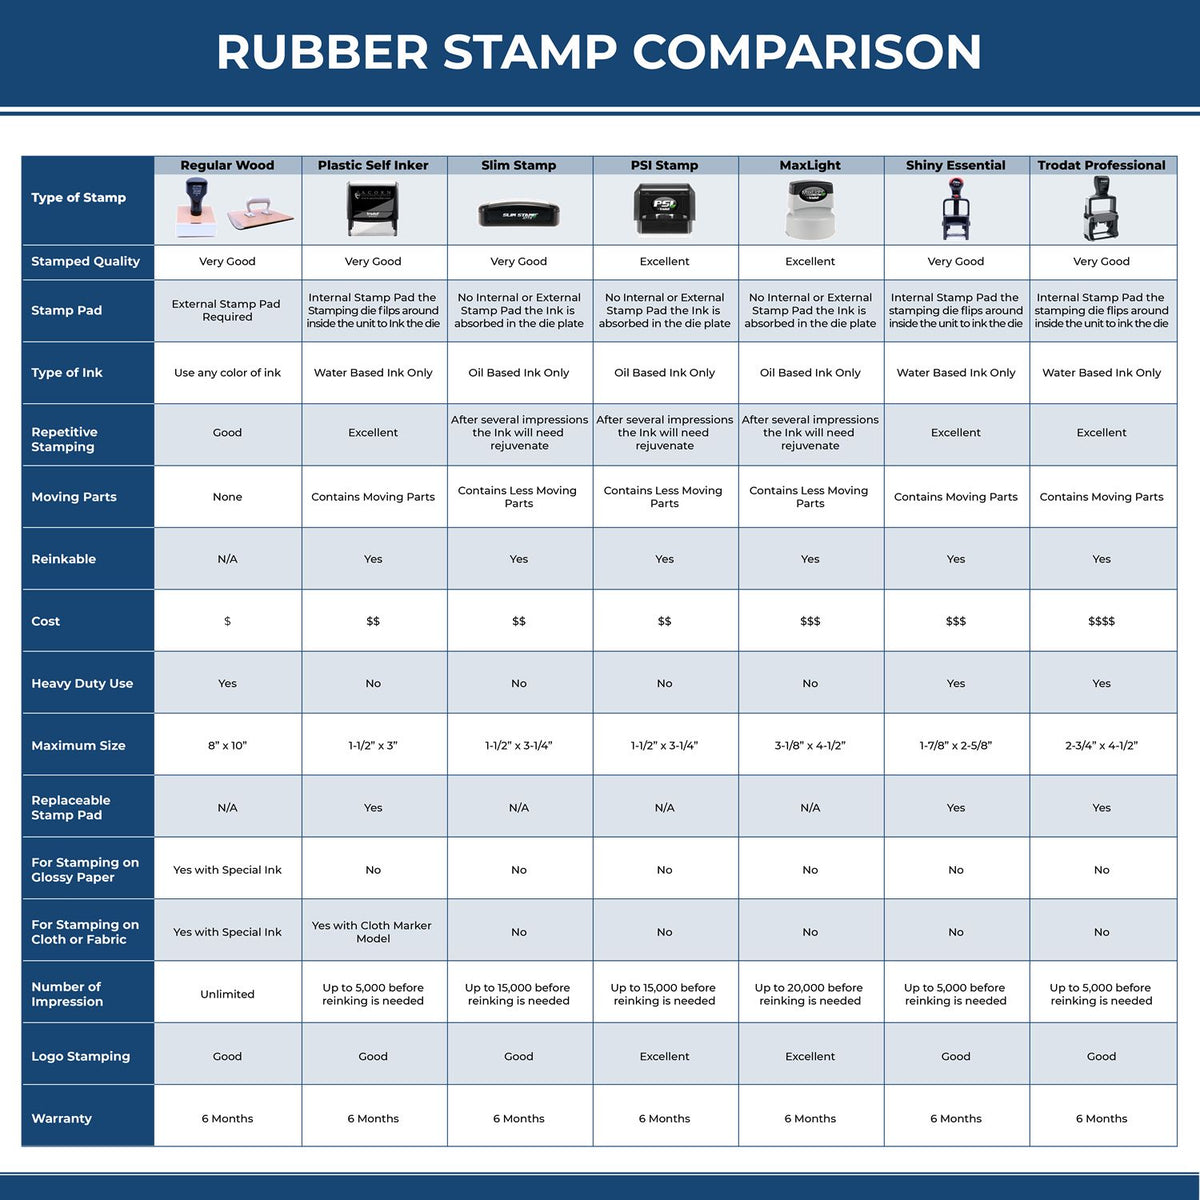 A comparison chart for the different types of mount models available for the Self-Inking Ohio PE Stamp.